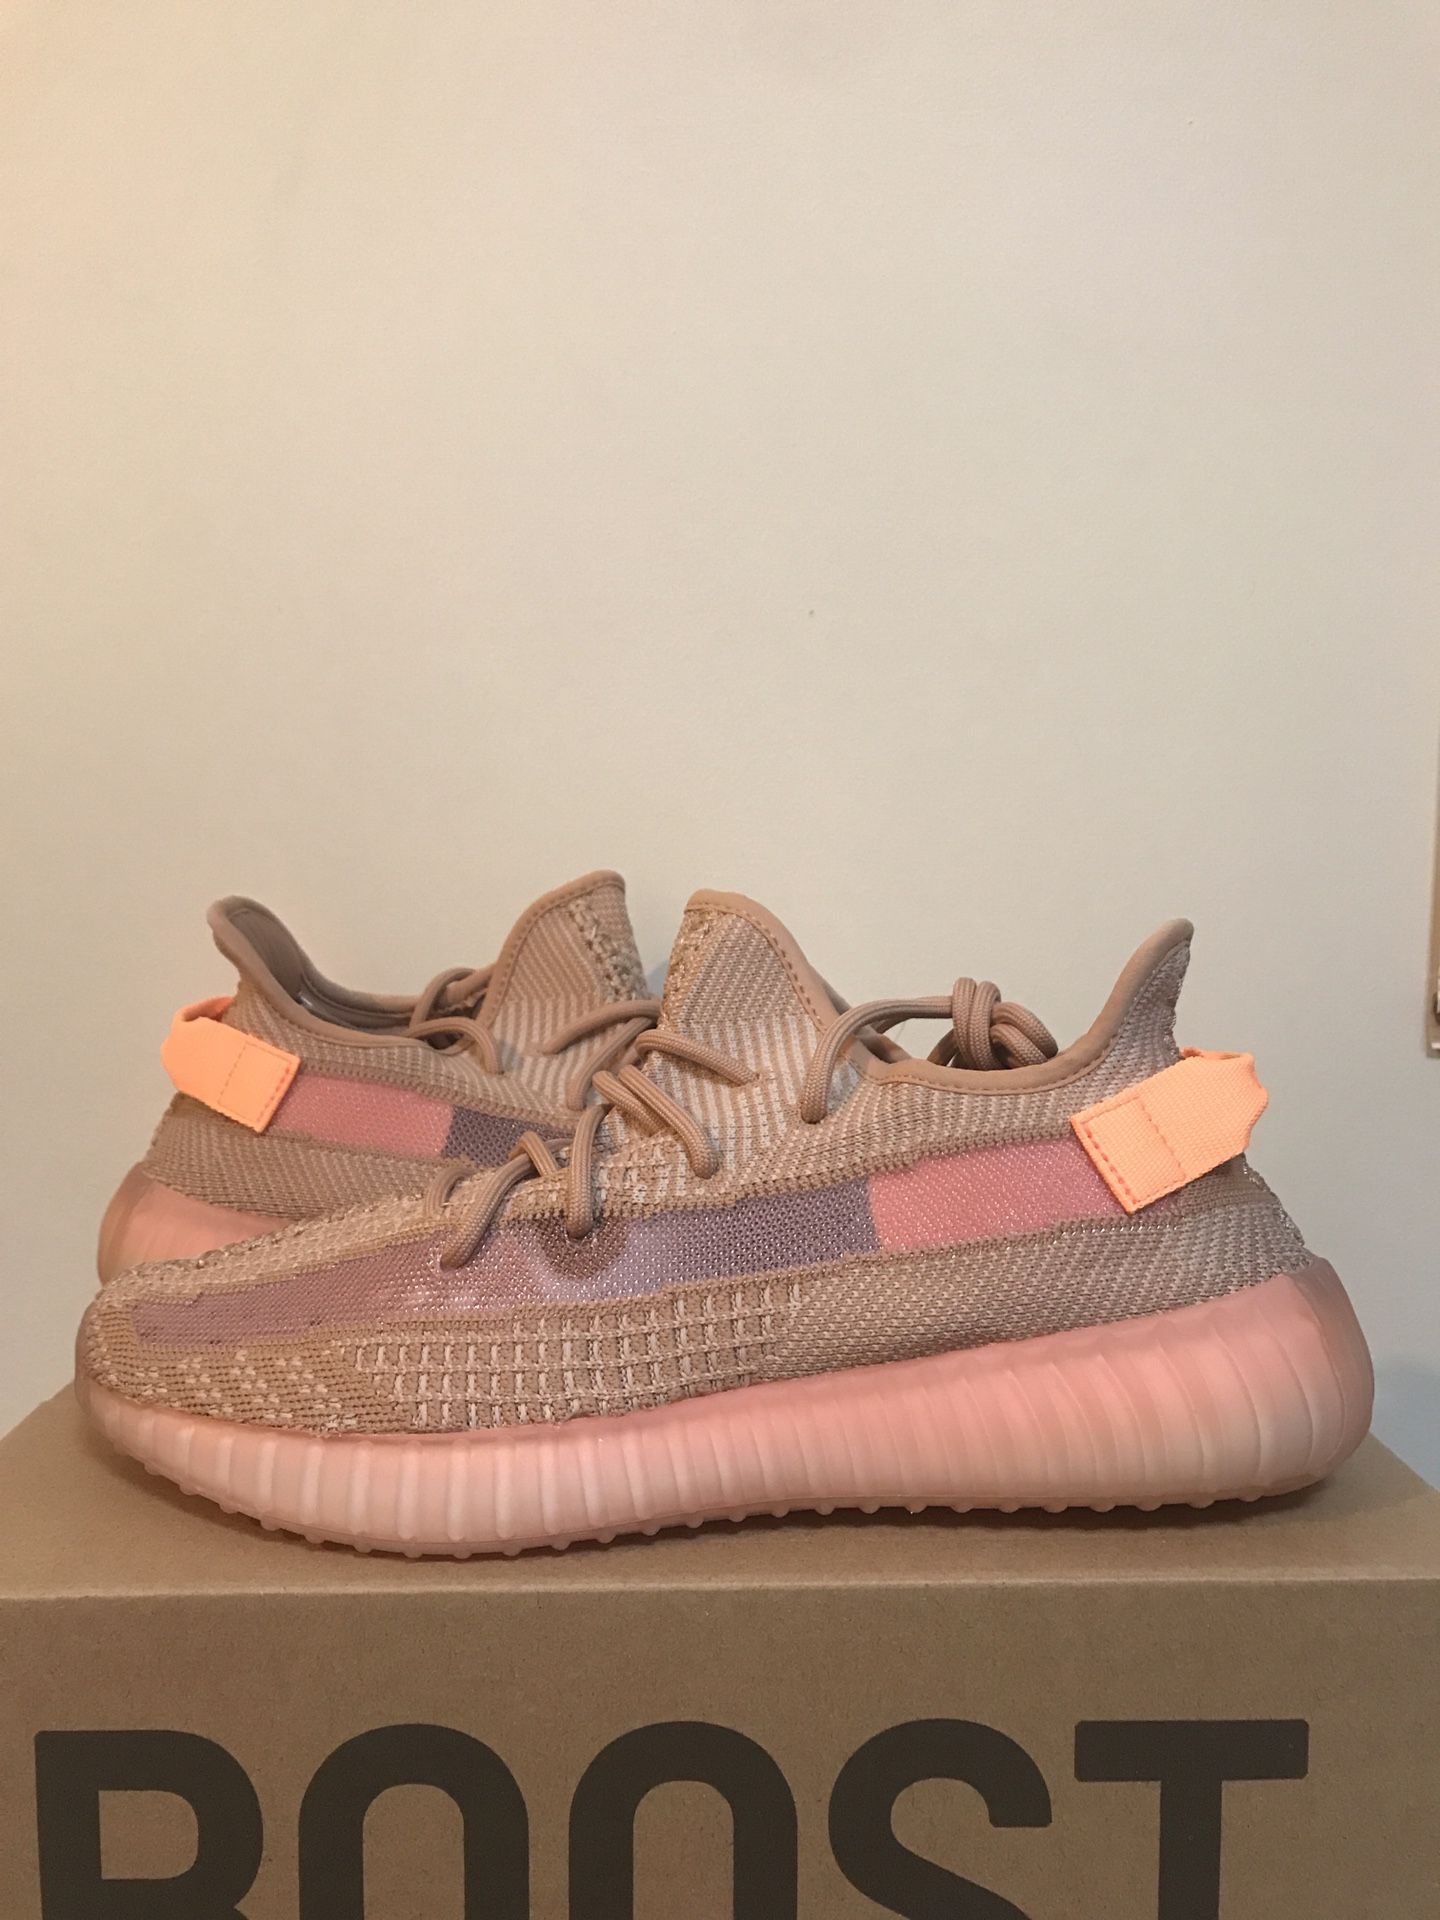 Adidas Yeezy Boost 350 Clay’s Size 10-11